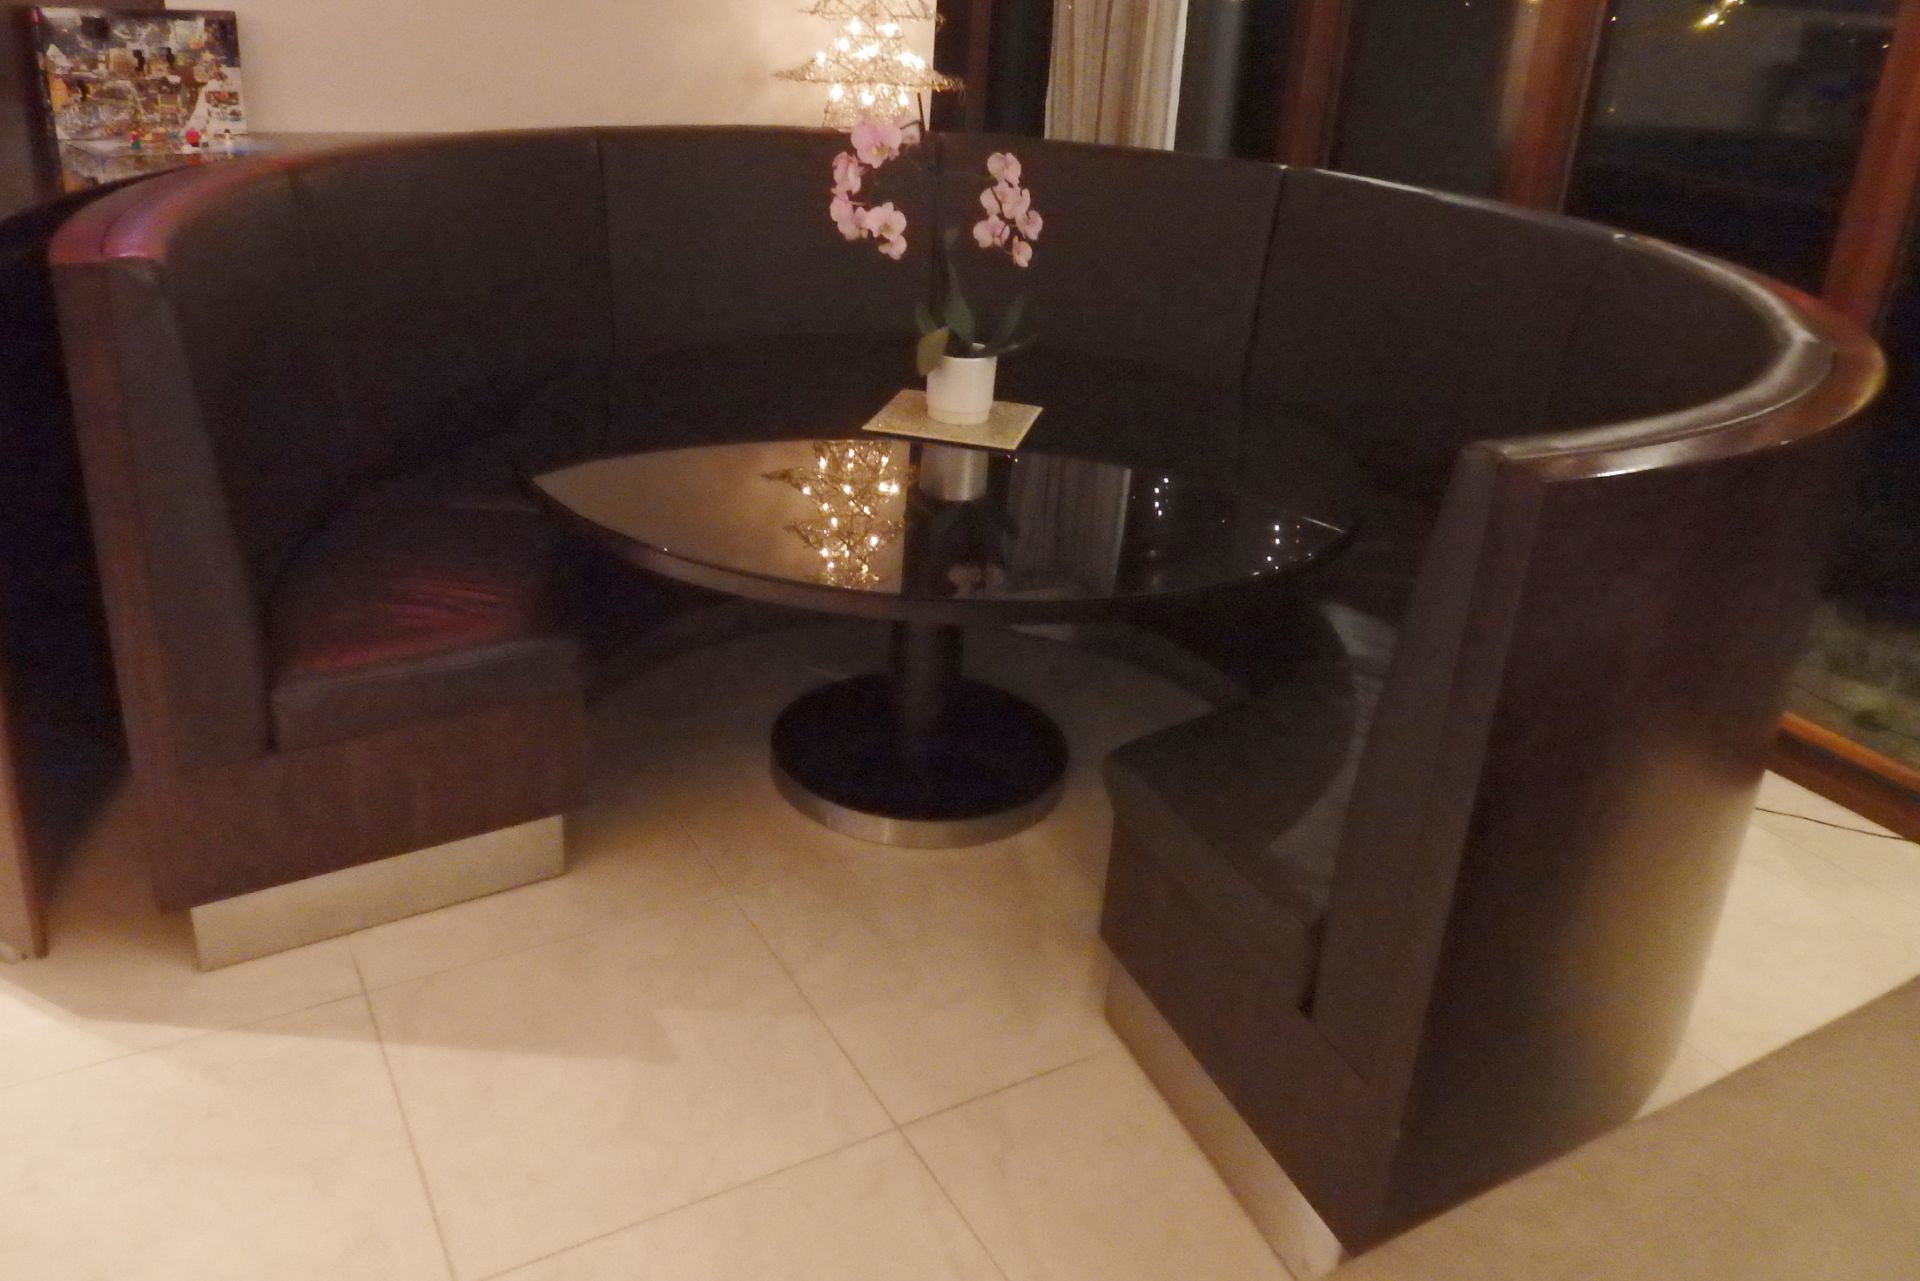 1 x Bespoke American Walnut / Genuine Leather Seating Booth - Perfect For The Modern Home or Bar - - Image 4 of 18